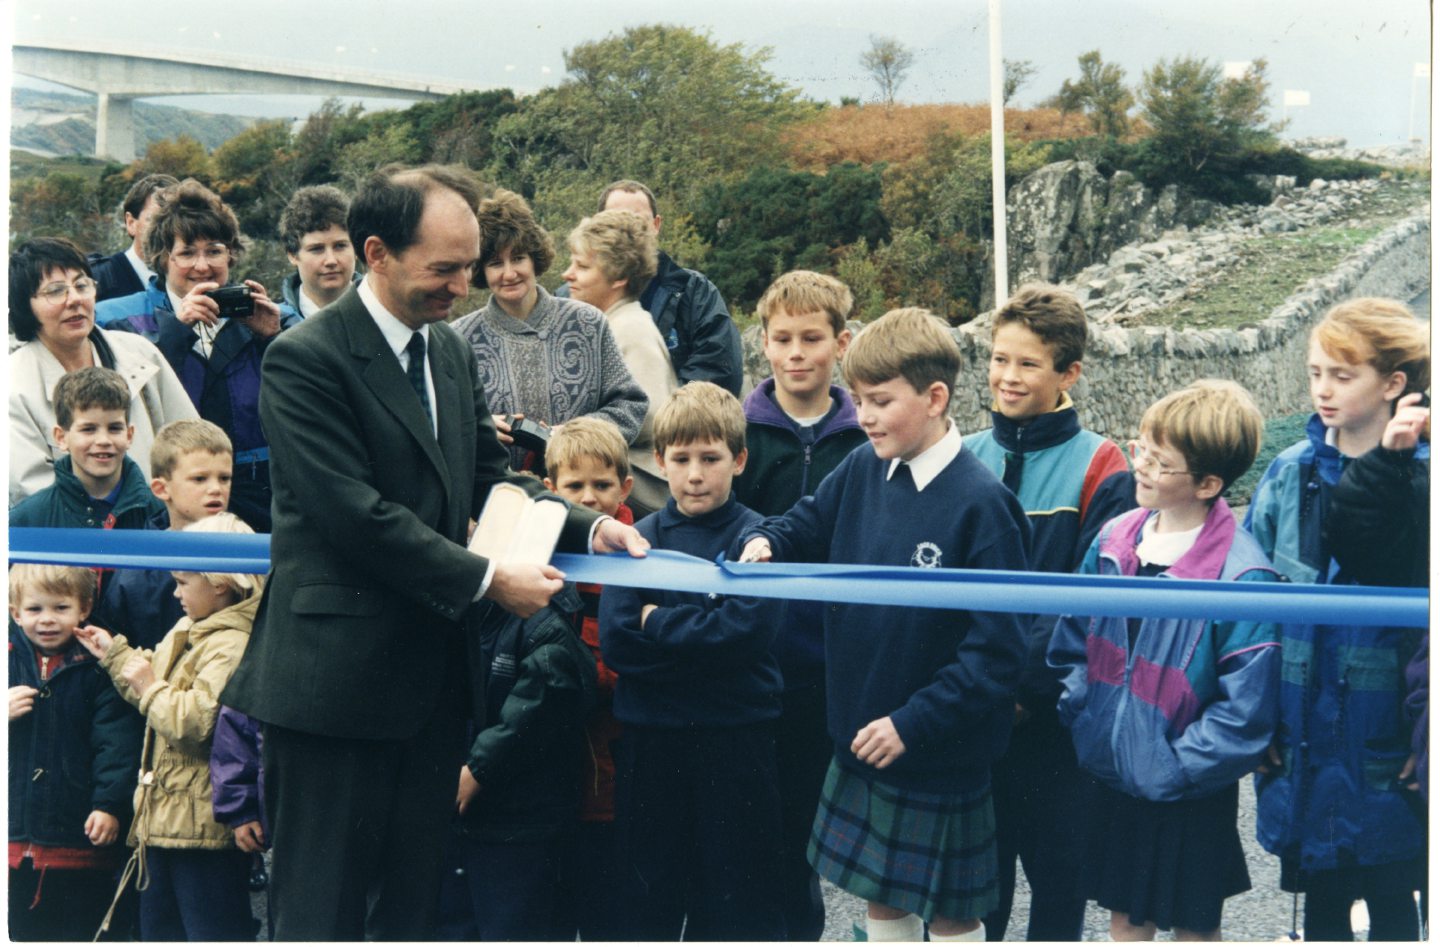 There was no doubting the success of the Skye Bridge after it was opened in 1995.